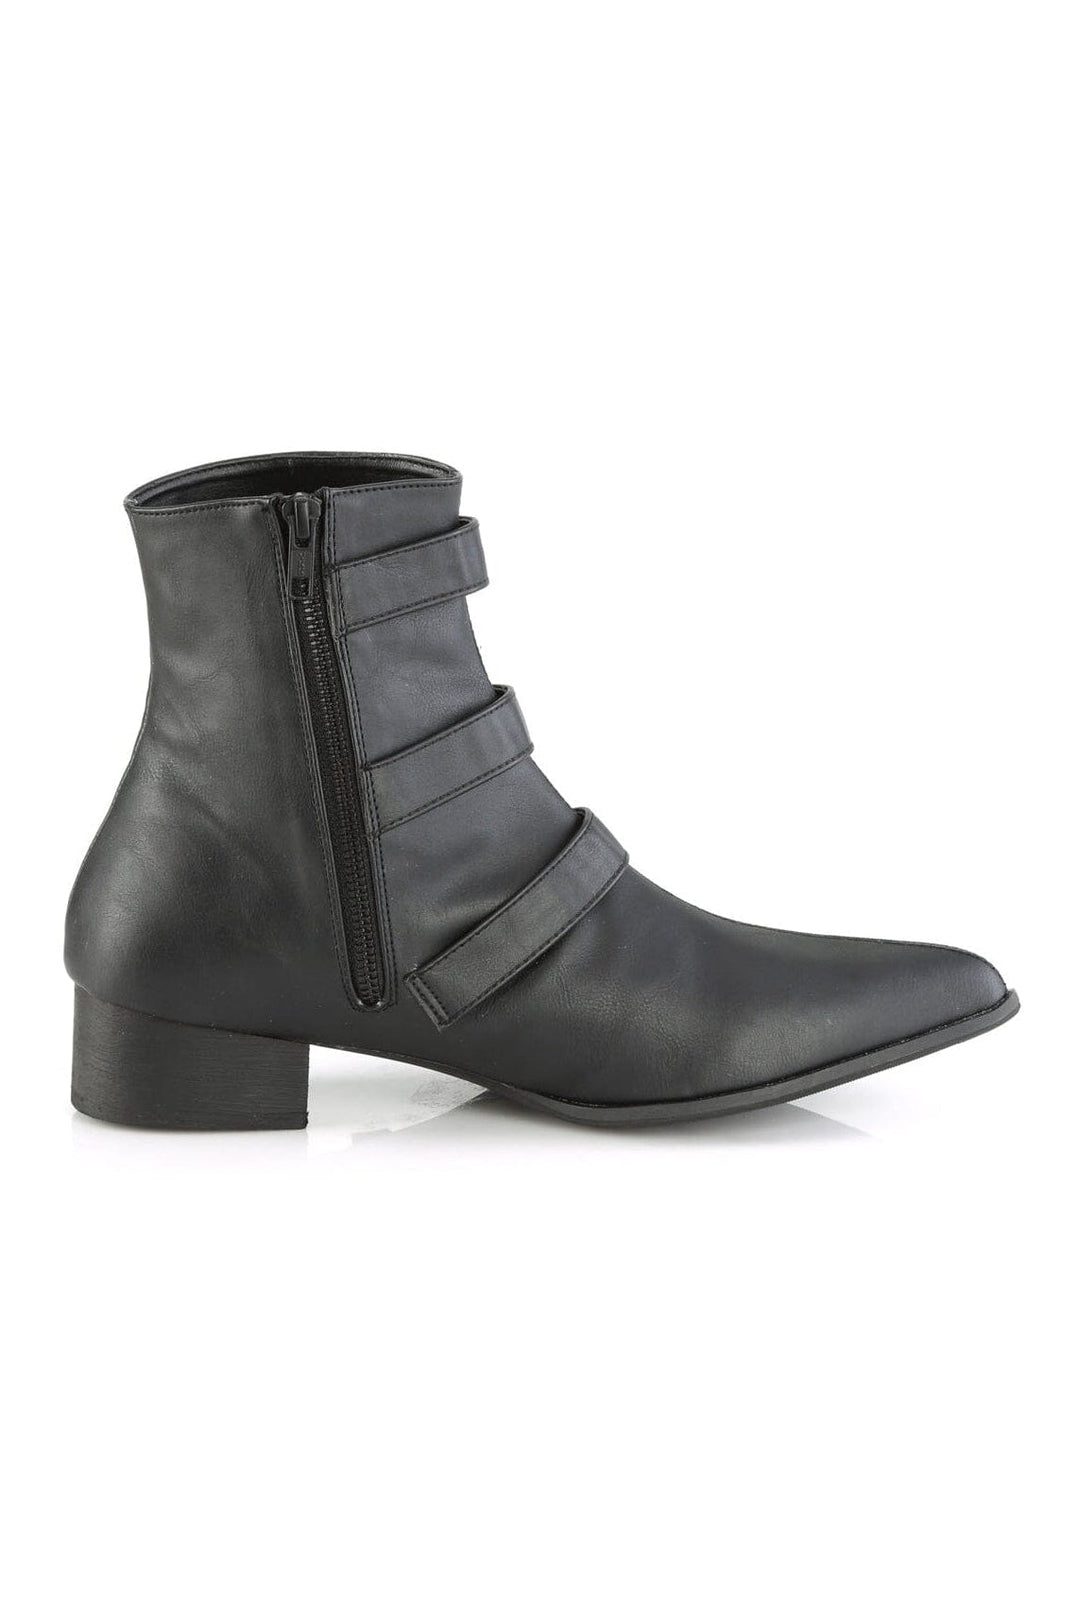 WARLOCK-50-B Black Vegan Leather Ankle Boot-Ankle Boots-Demonia-SEXYSHOES.COM